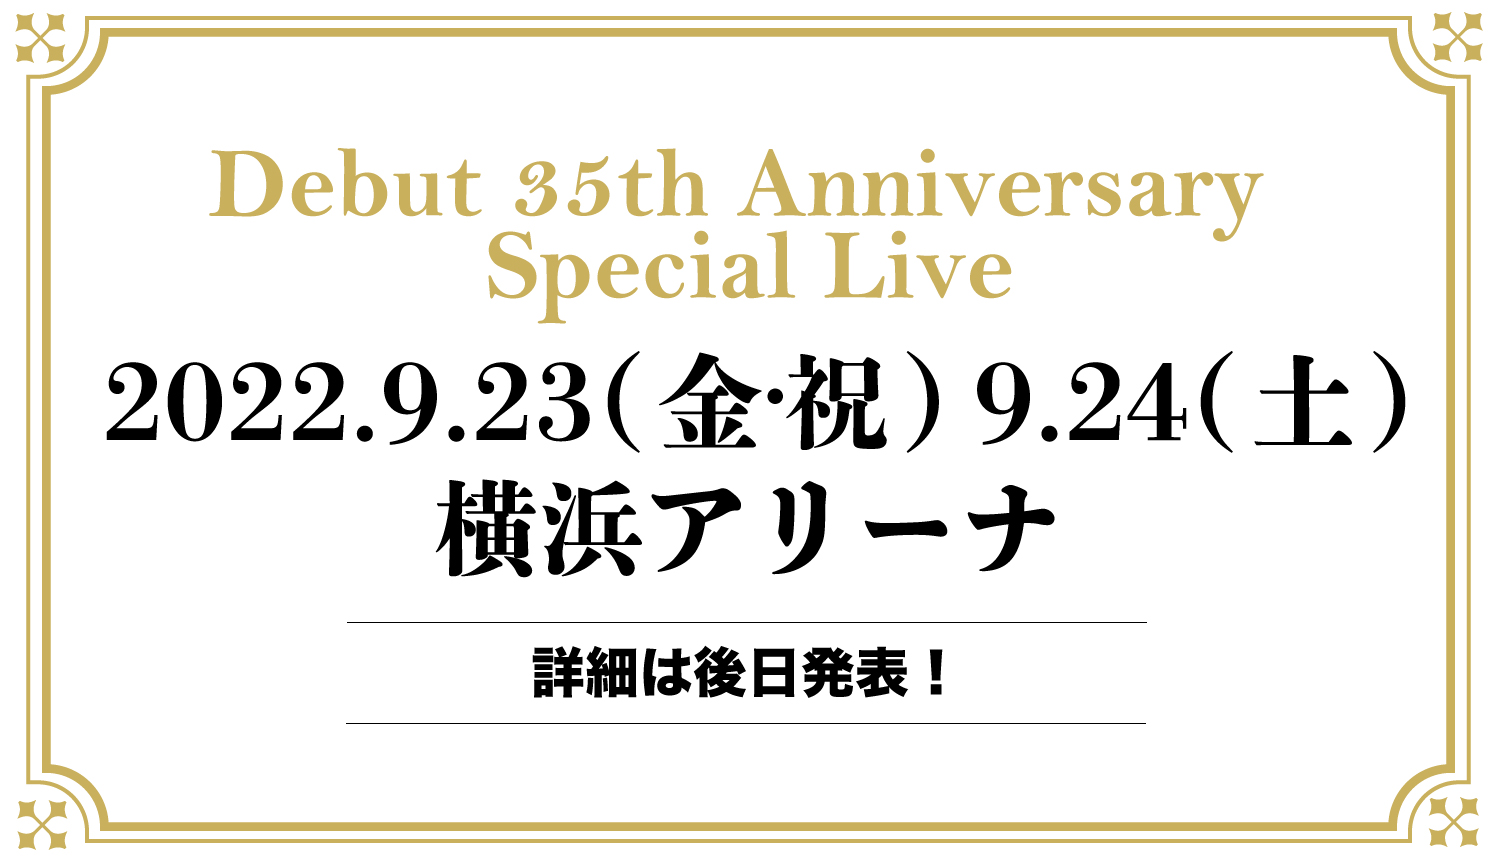 Debut 35th Anniversary Special Live